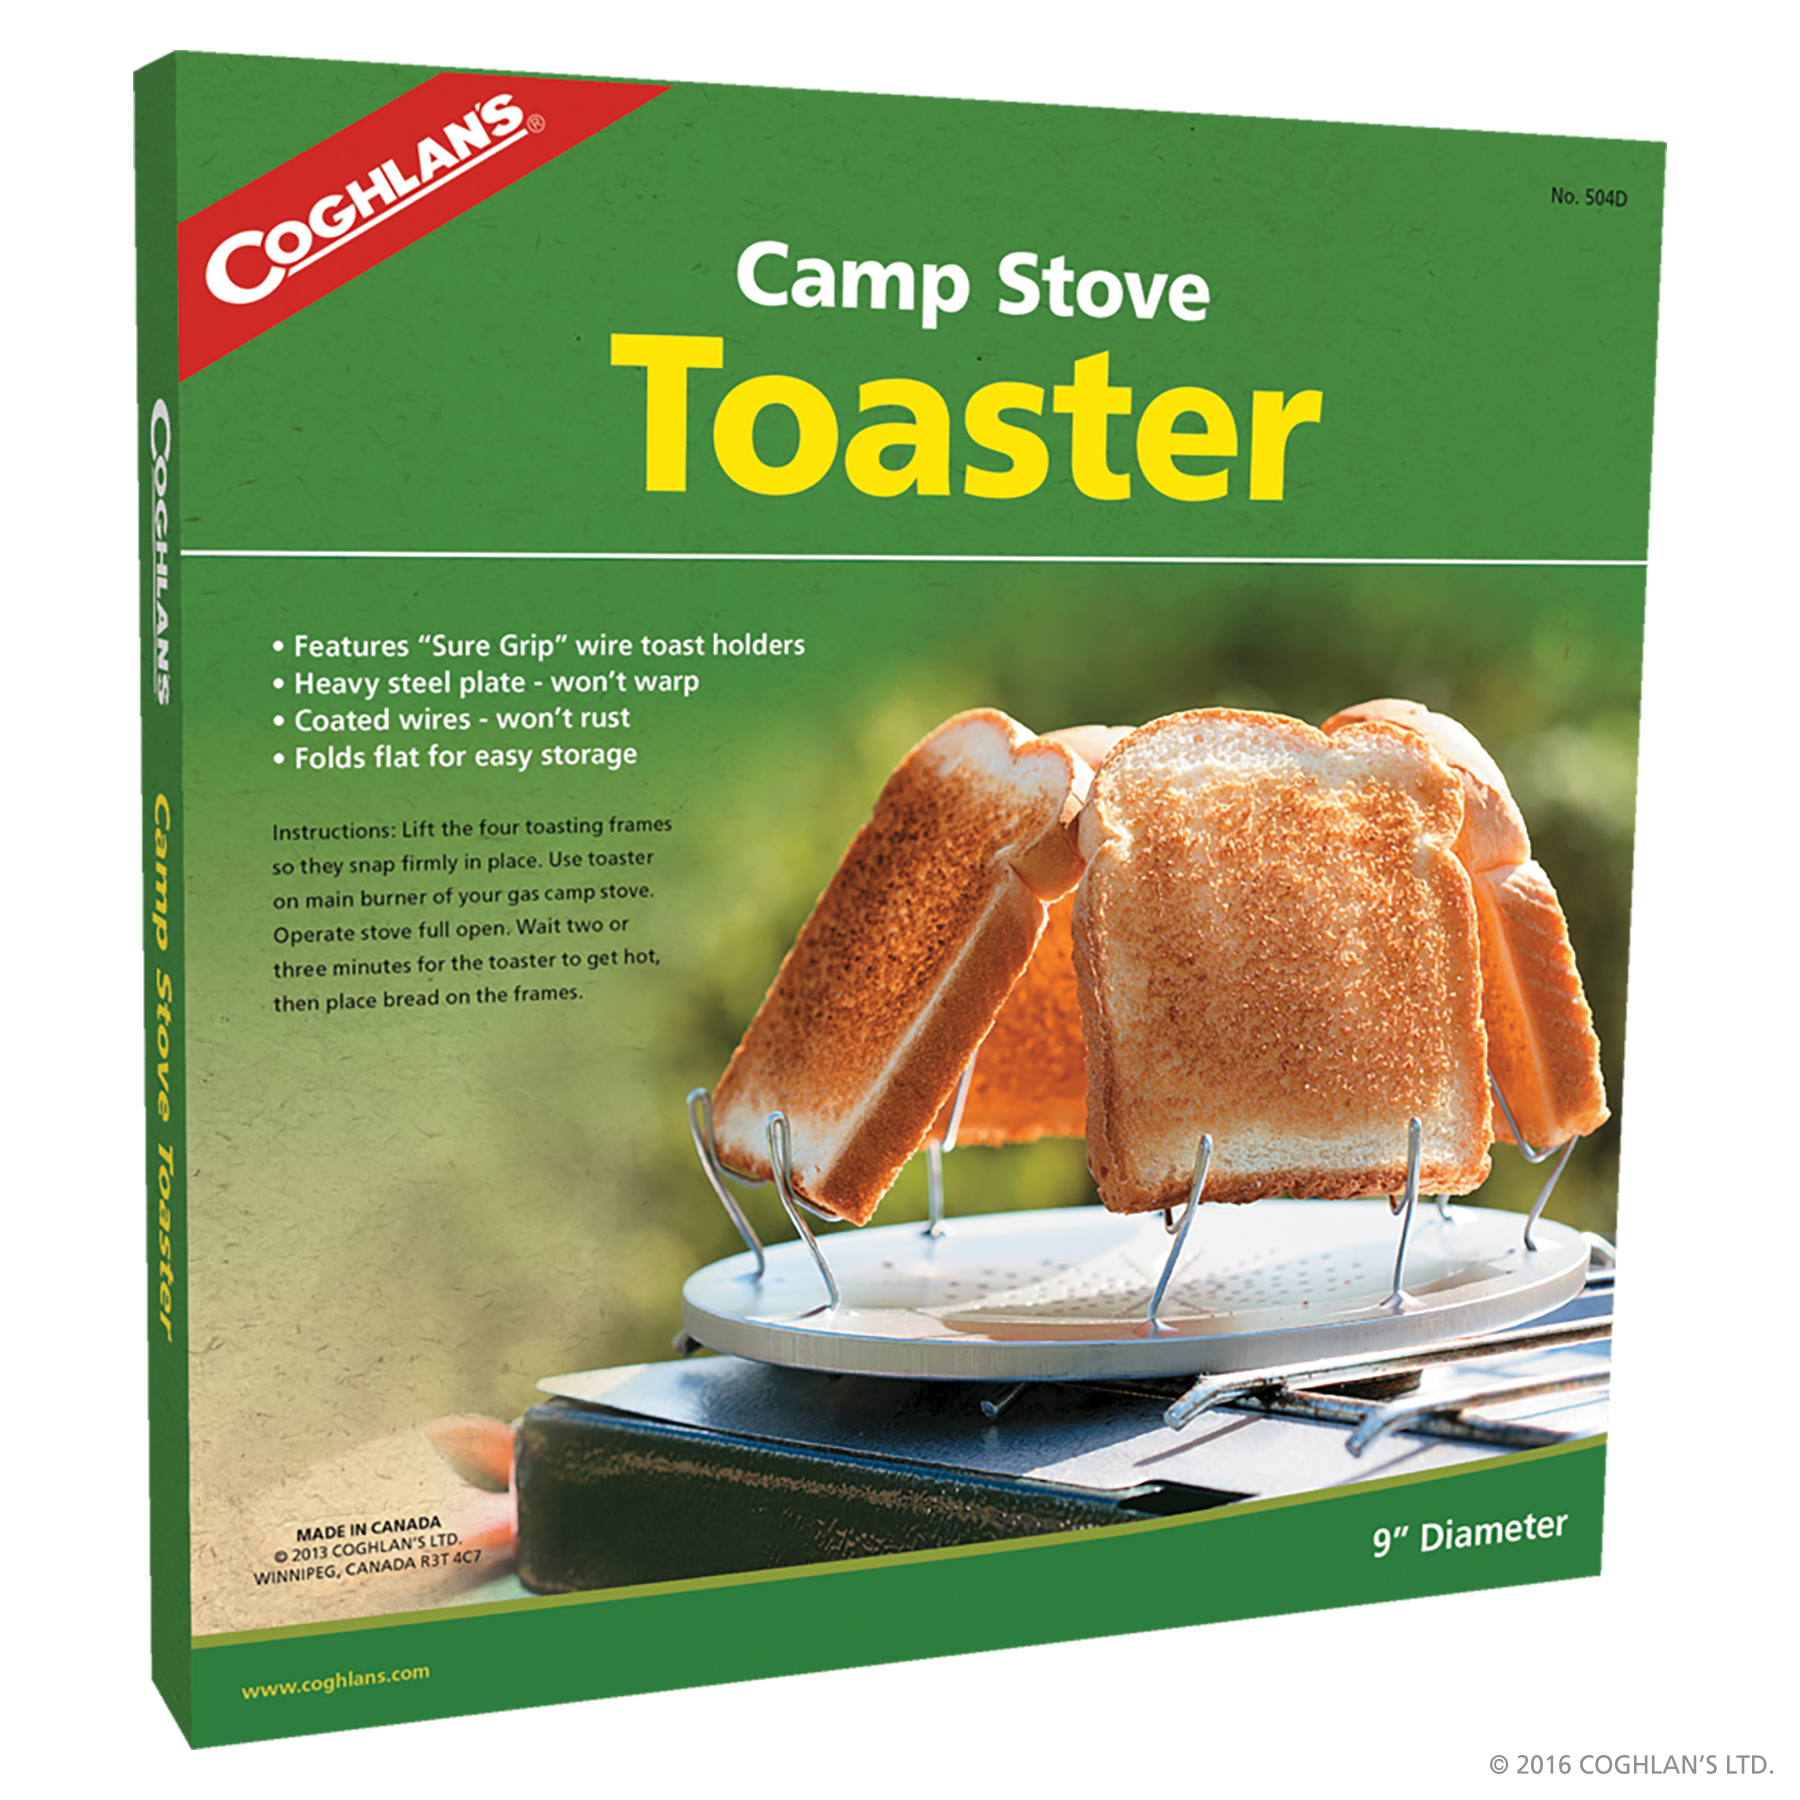 Campfire toaster review